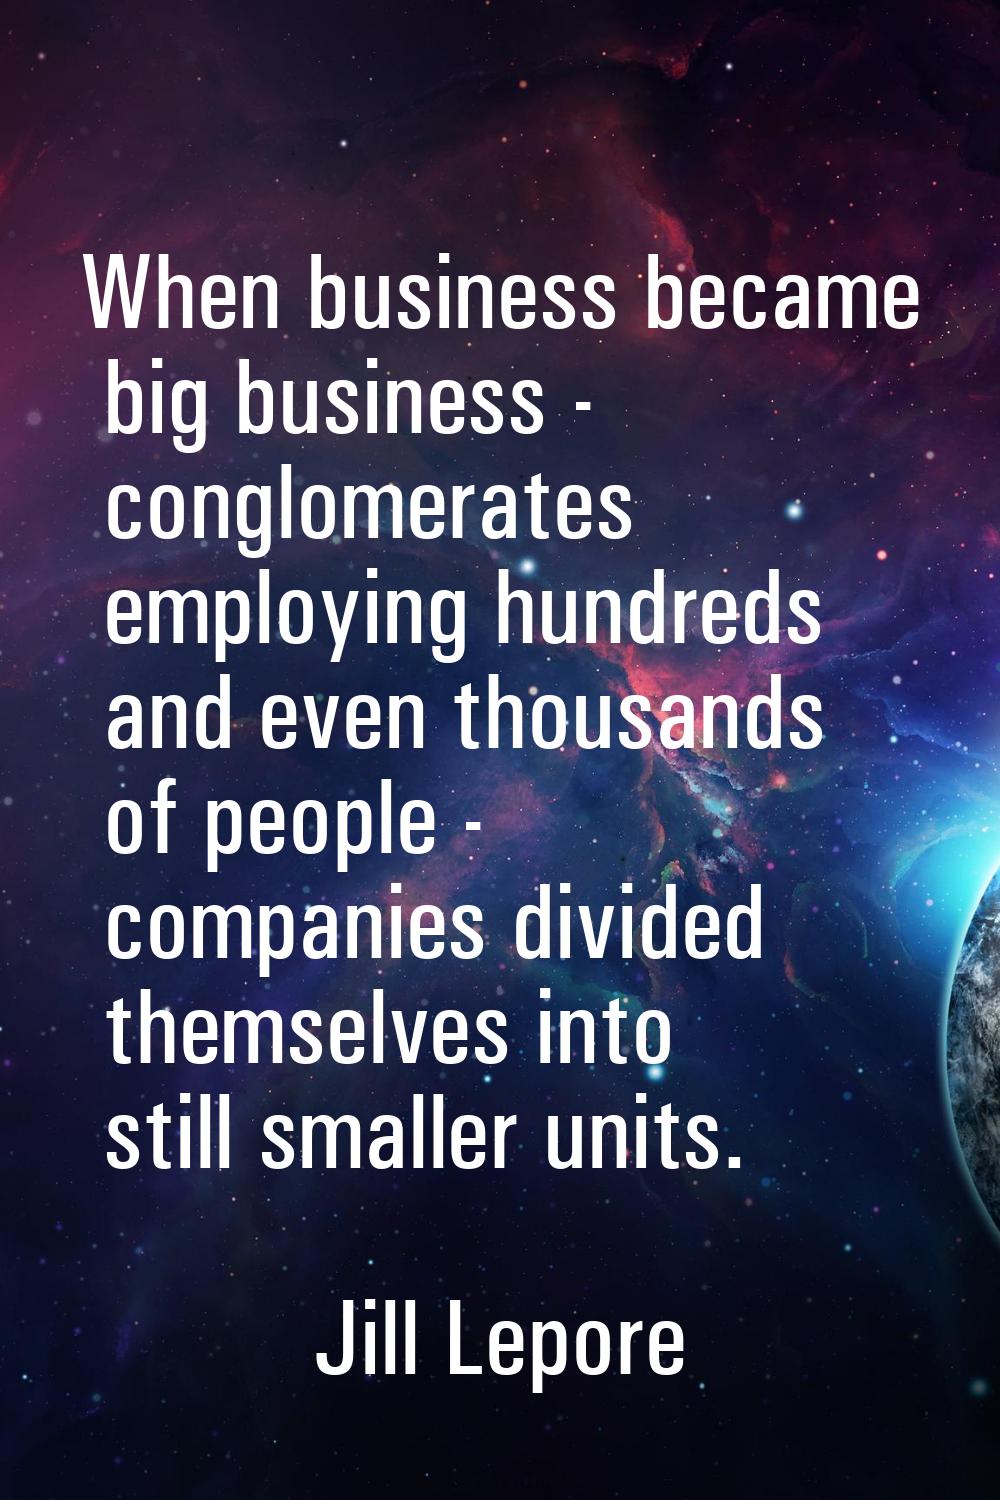 When business became big business - conglomerates employing hundreds and even thousands of people -